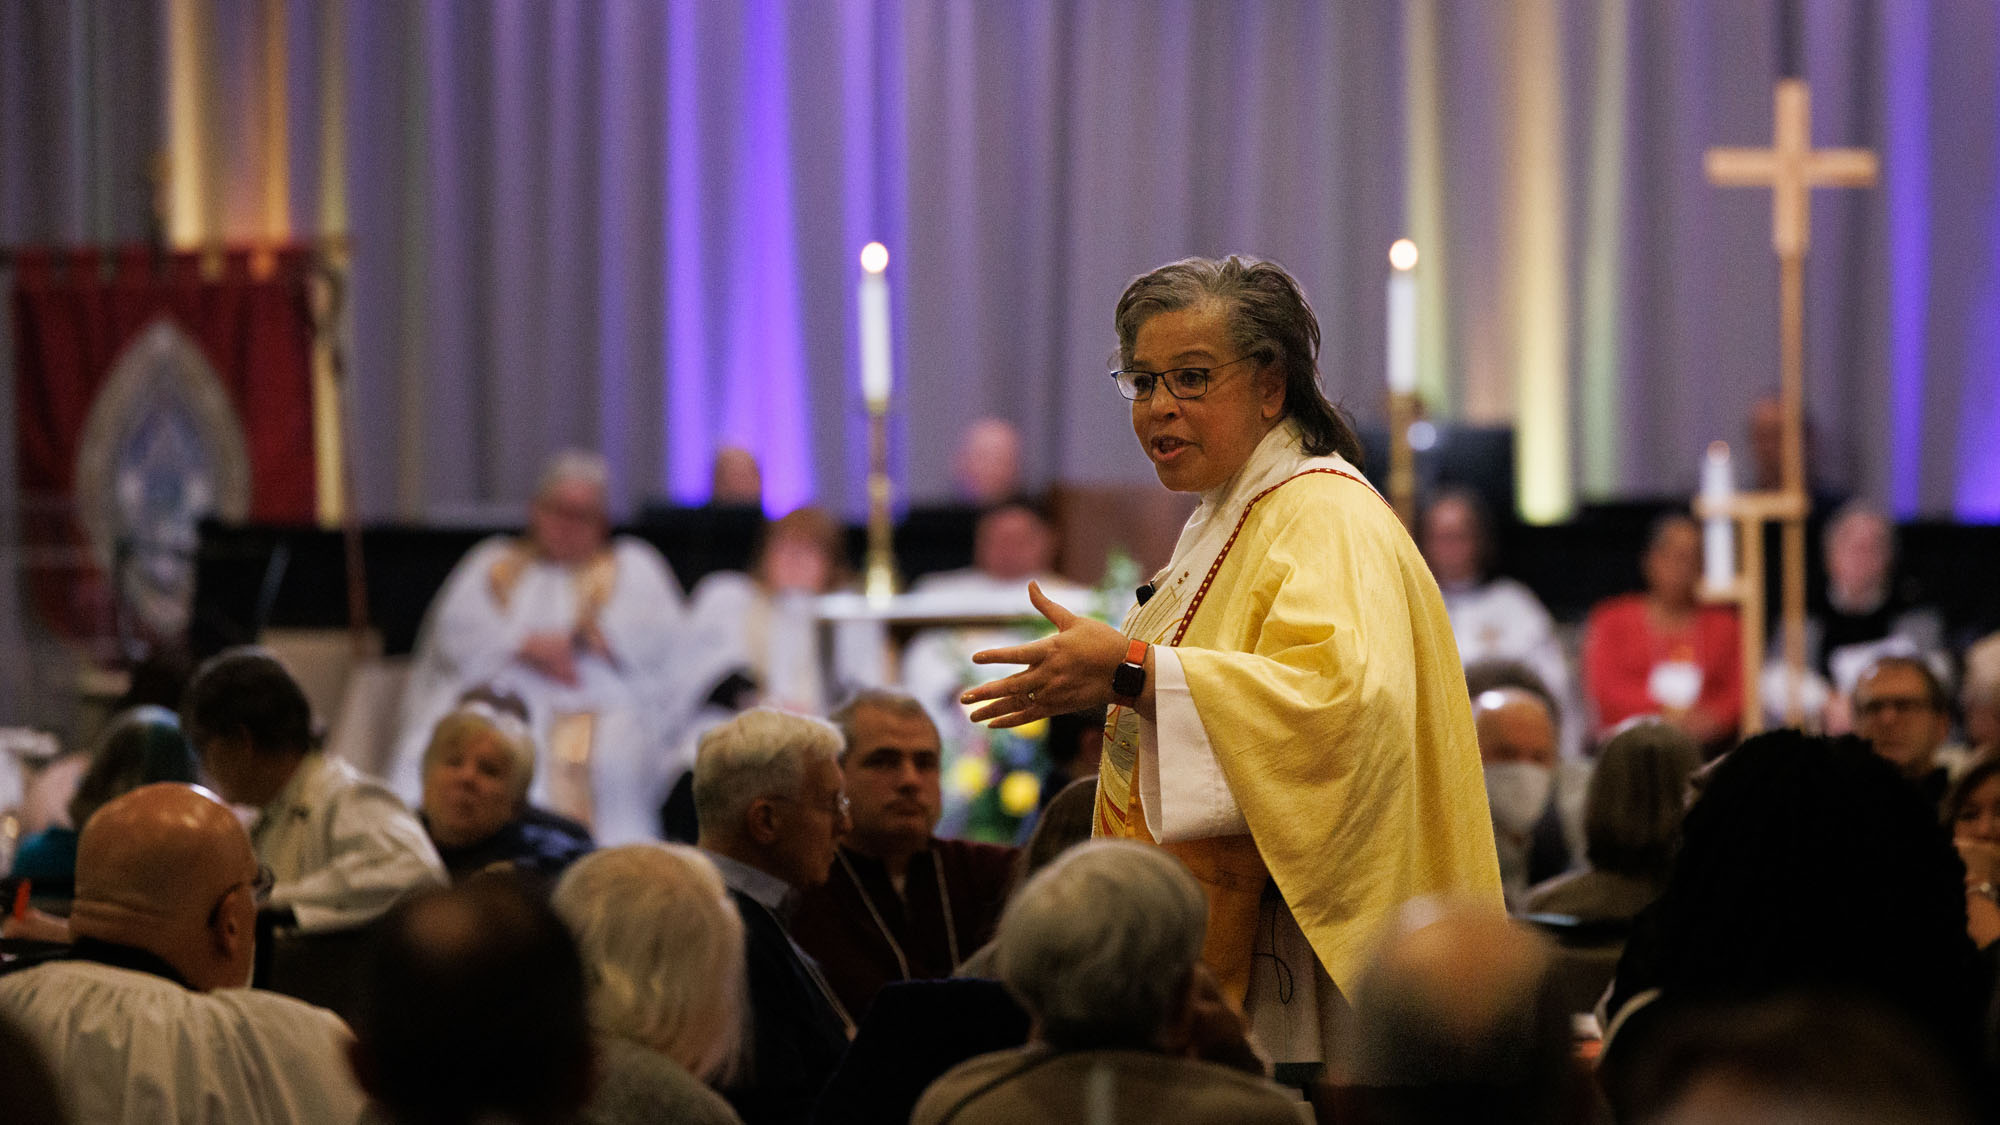 Bishop Hughes' sermon at the 149th Convention